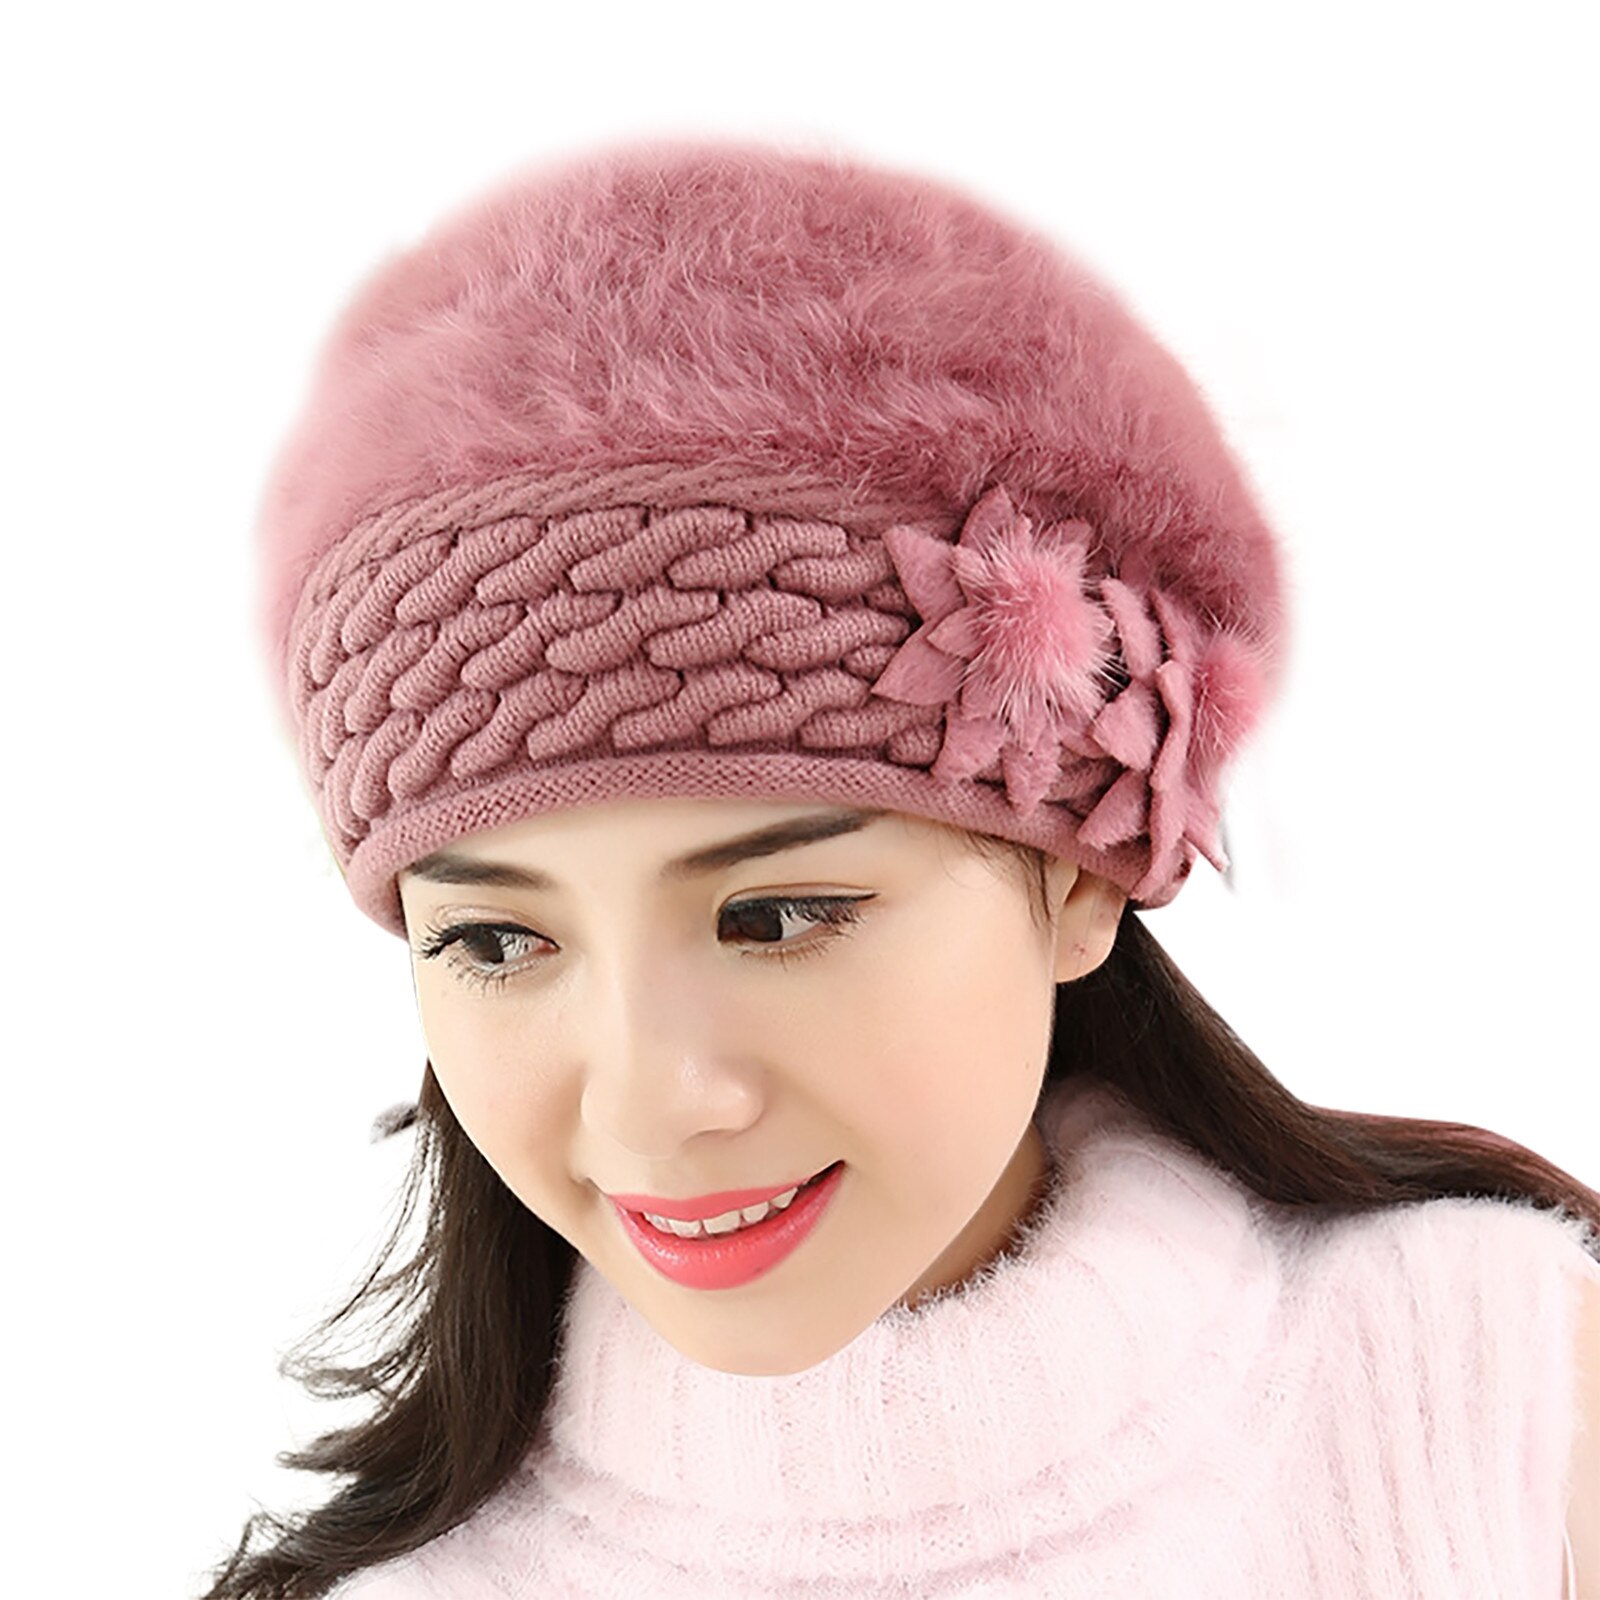 Beret Women Winter Hat Beanie Warm Knit Flower Double Layers Soft Thick Thermal Snow Skiing Outdoor Hats For Female Caps: Purple 